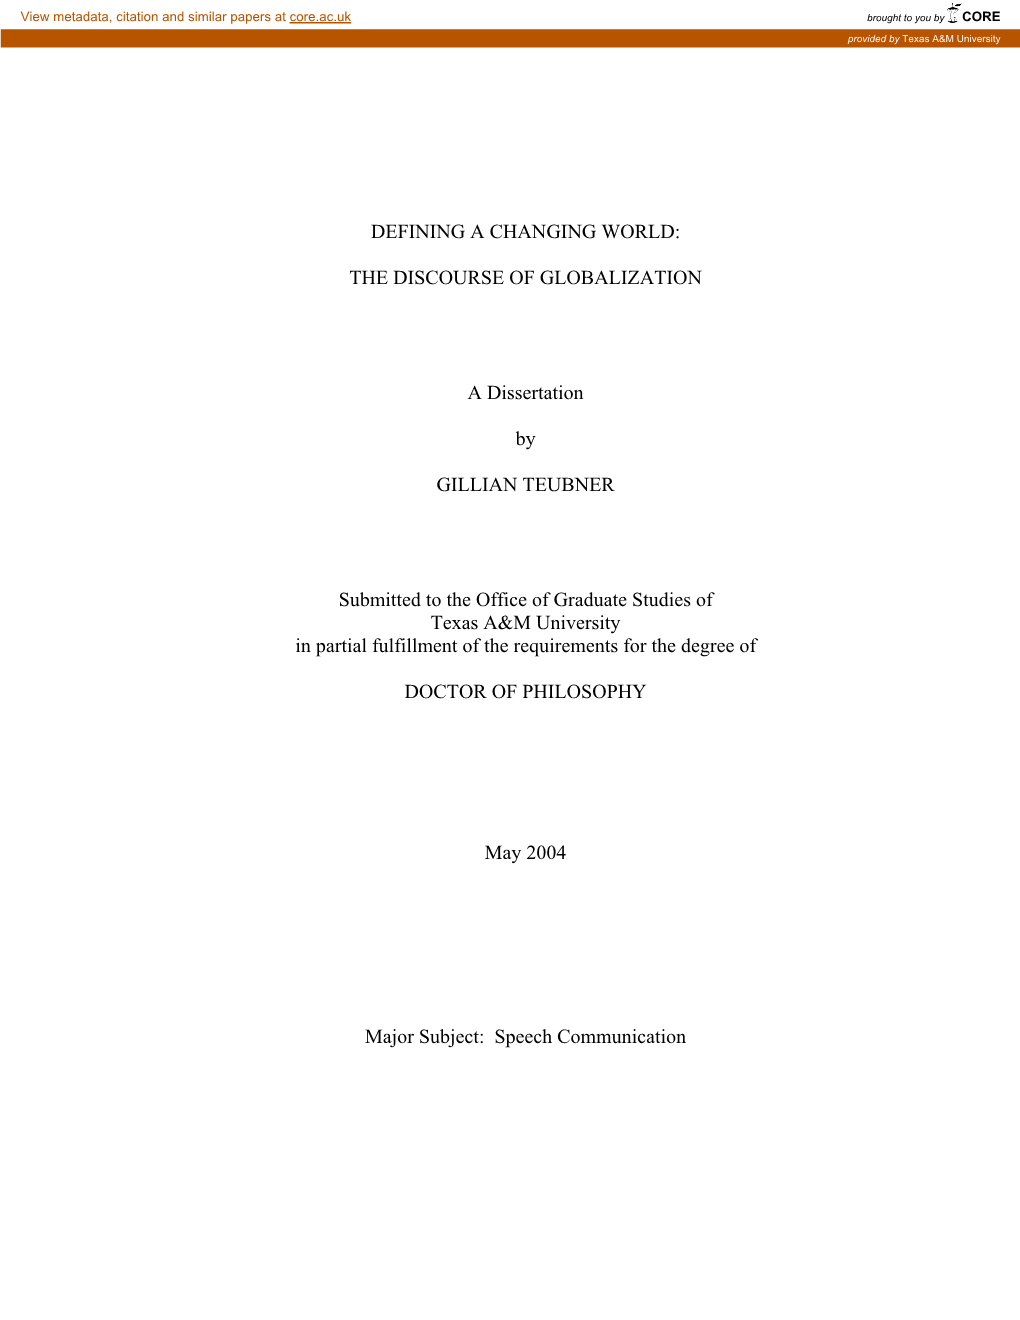 THE DISCOURSE of GLOBALIZATION a Dissertation By